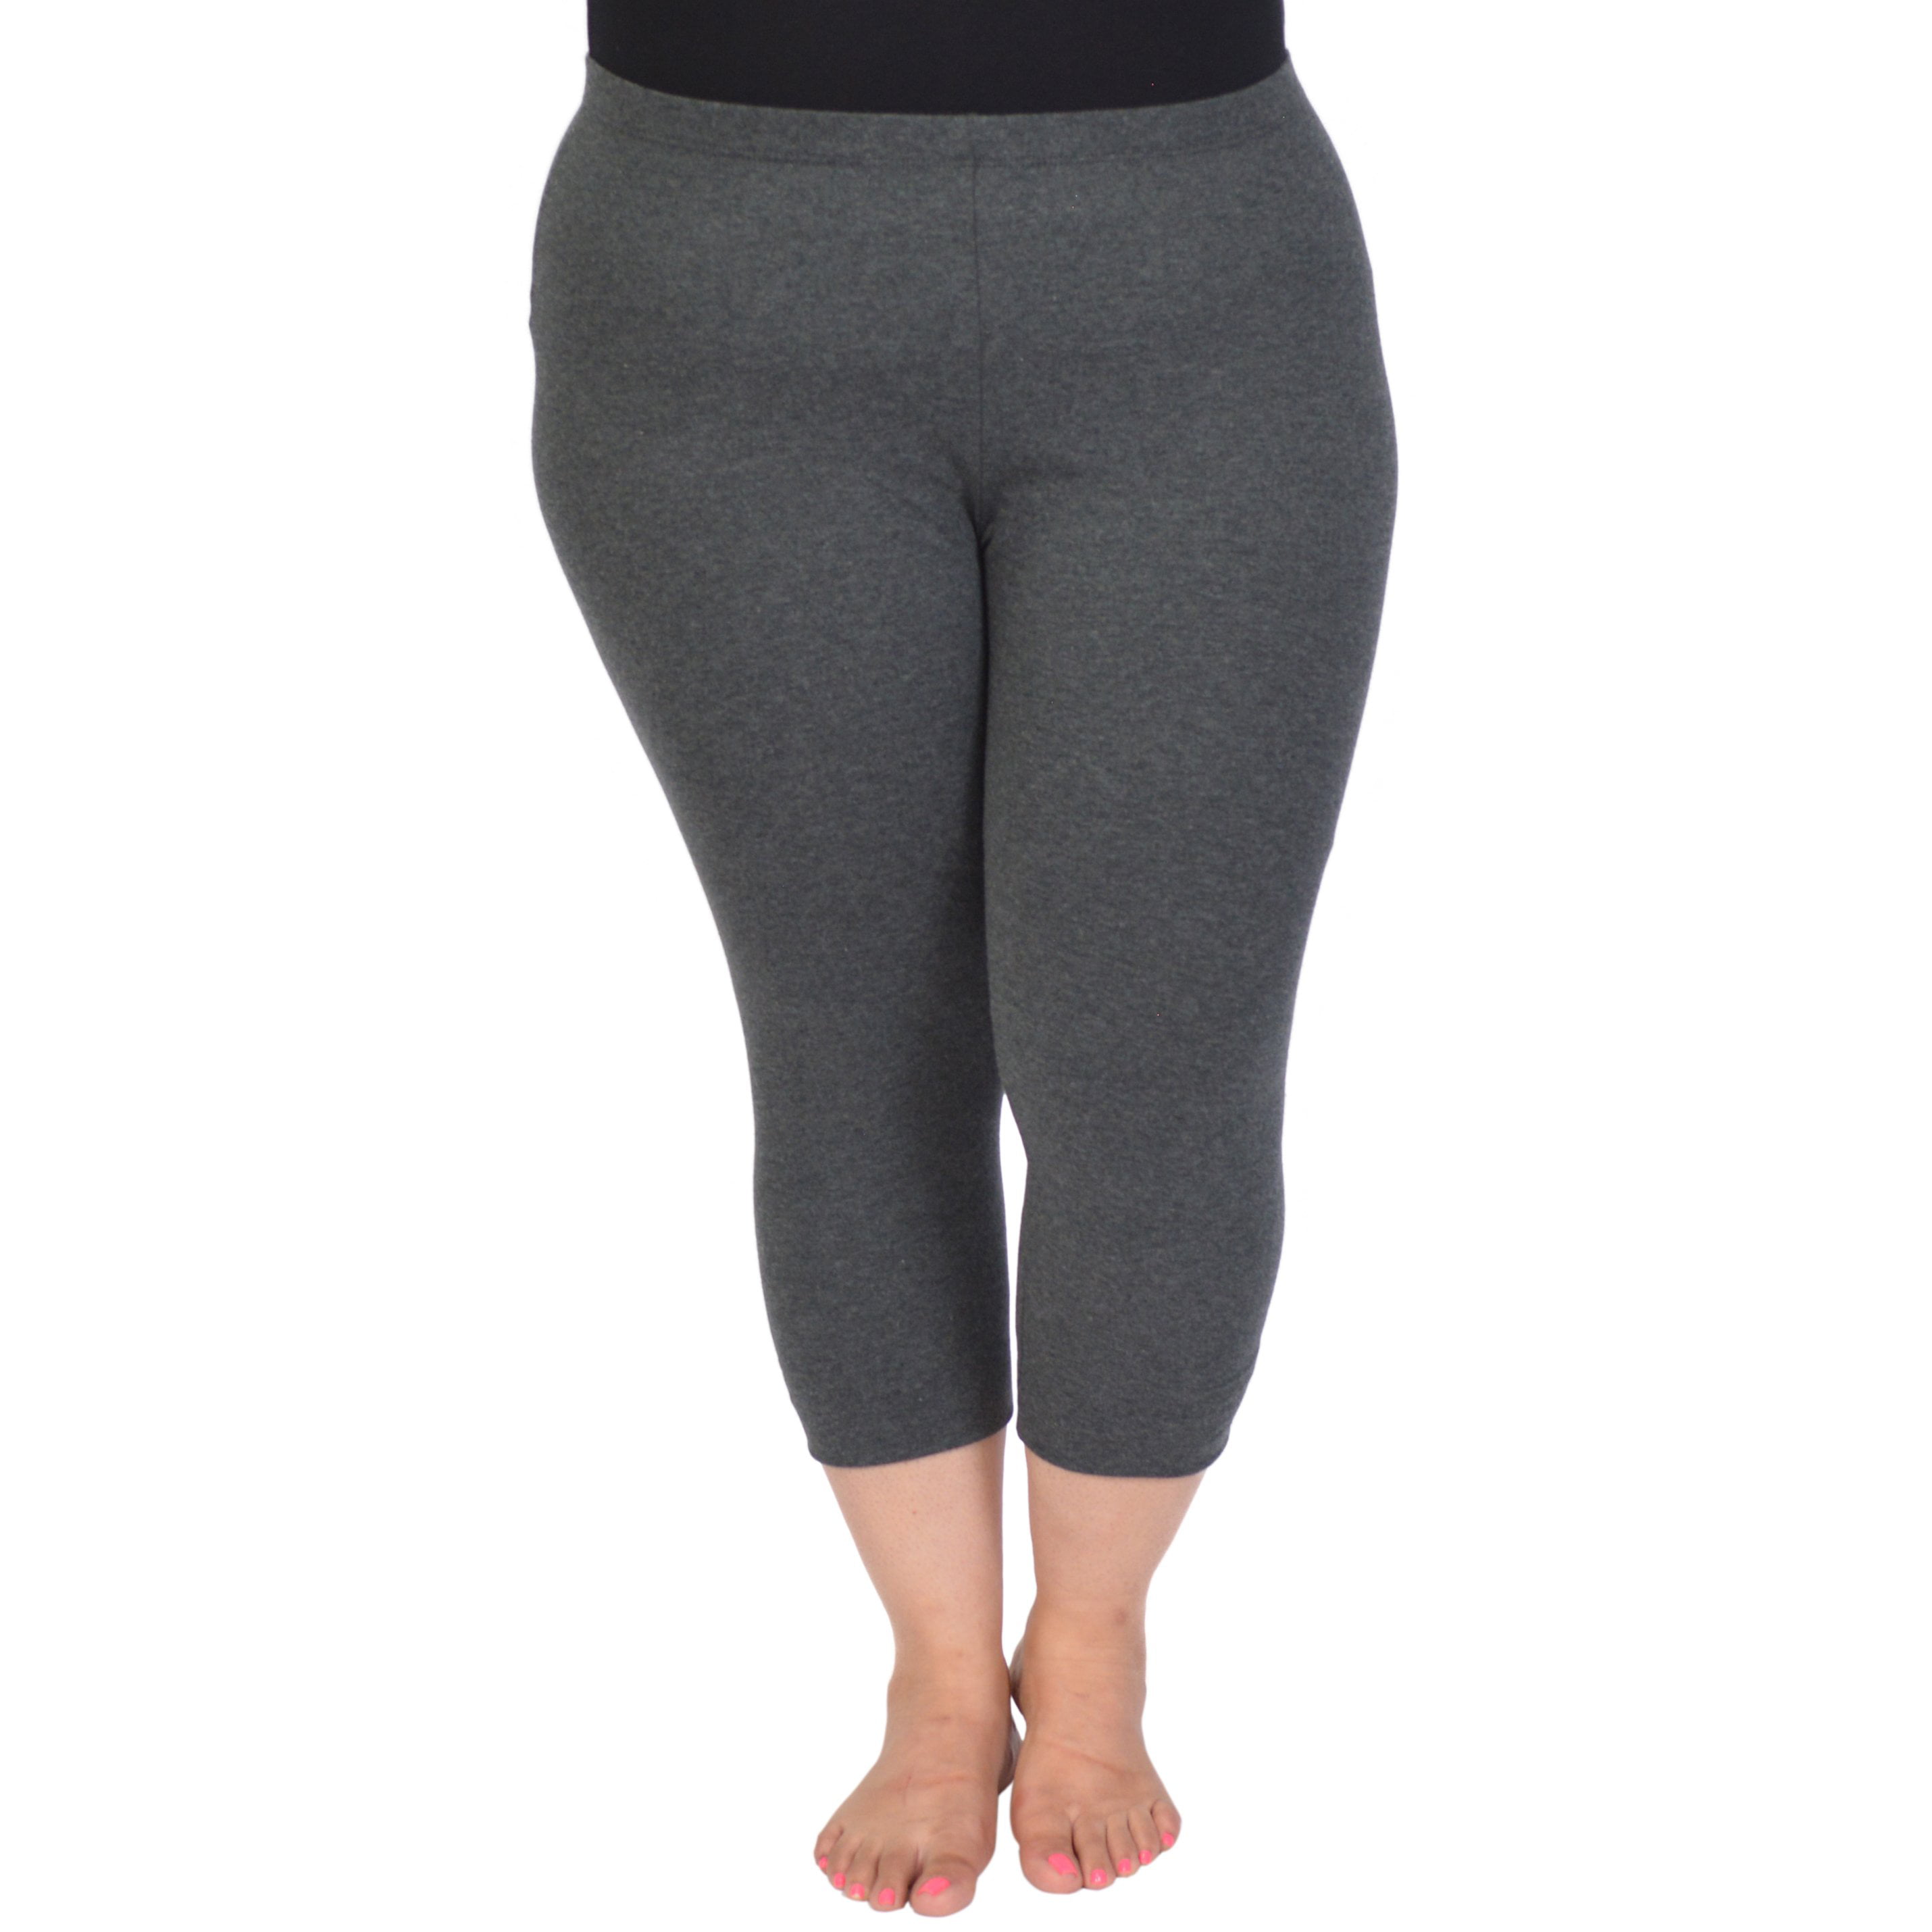 Stretch Is Comfort - Stretch Is Comfort Women's Regular and Plus Size ...